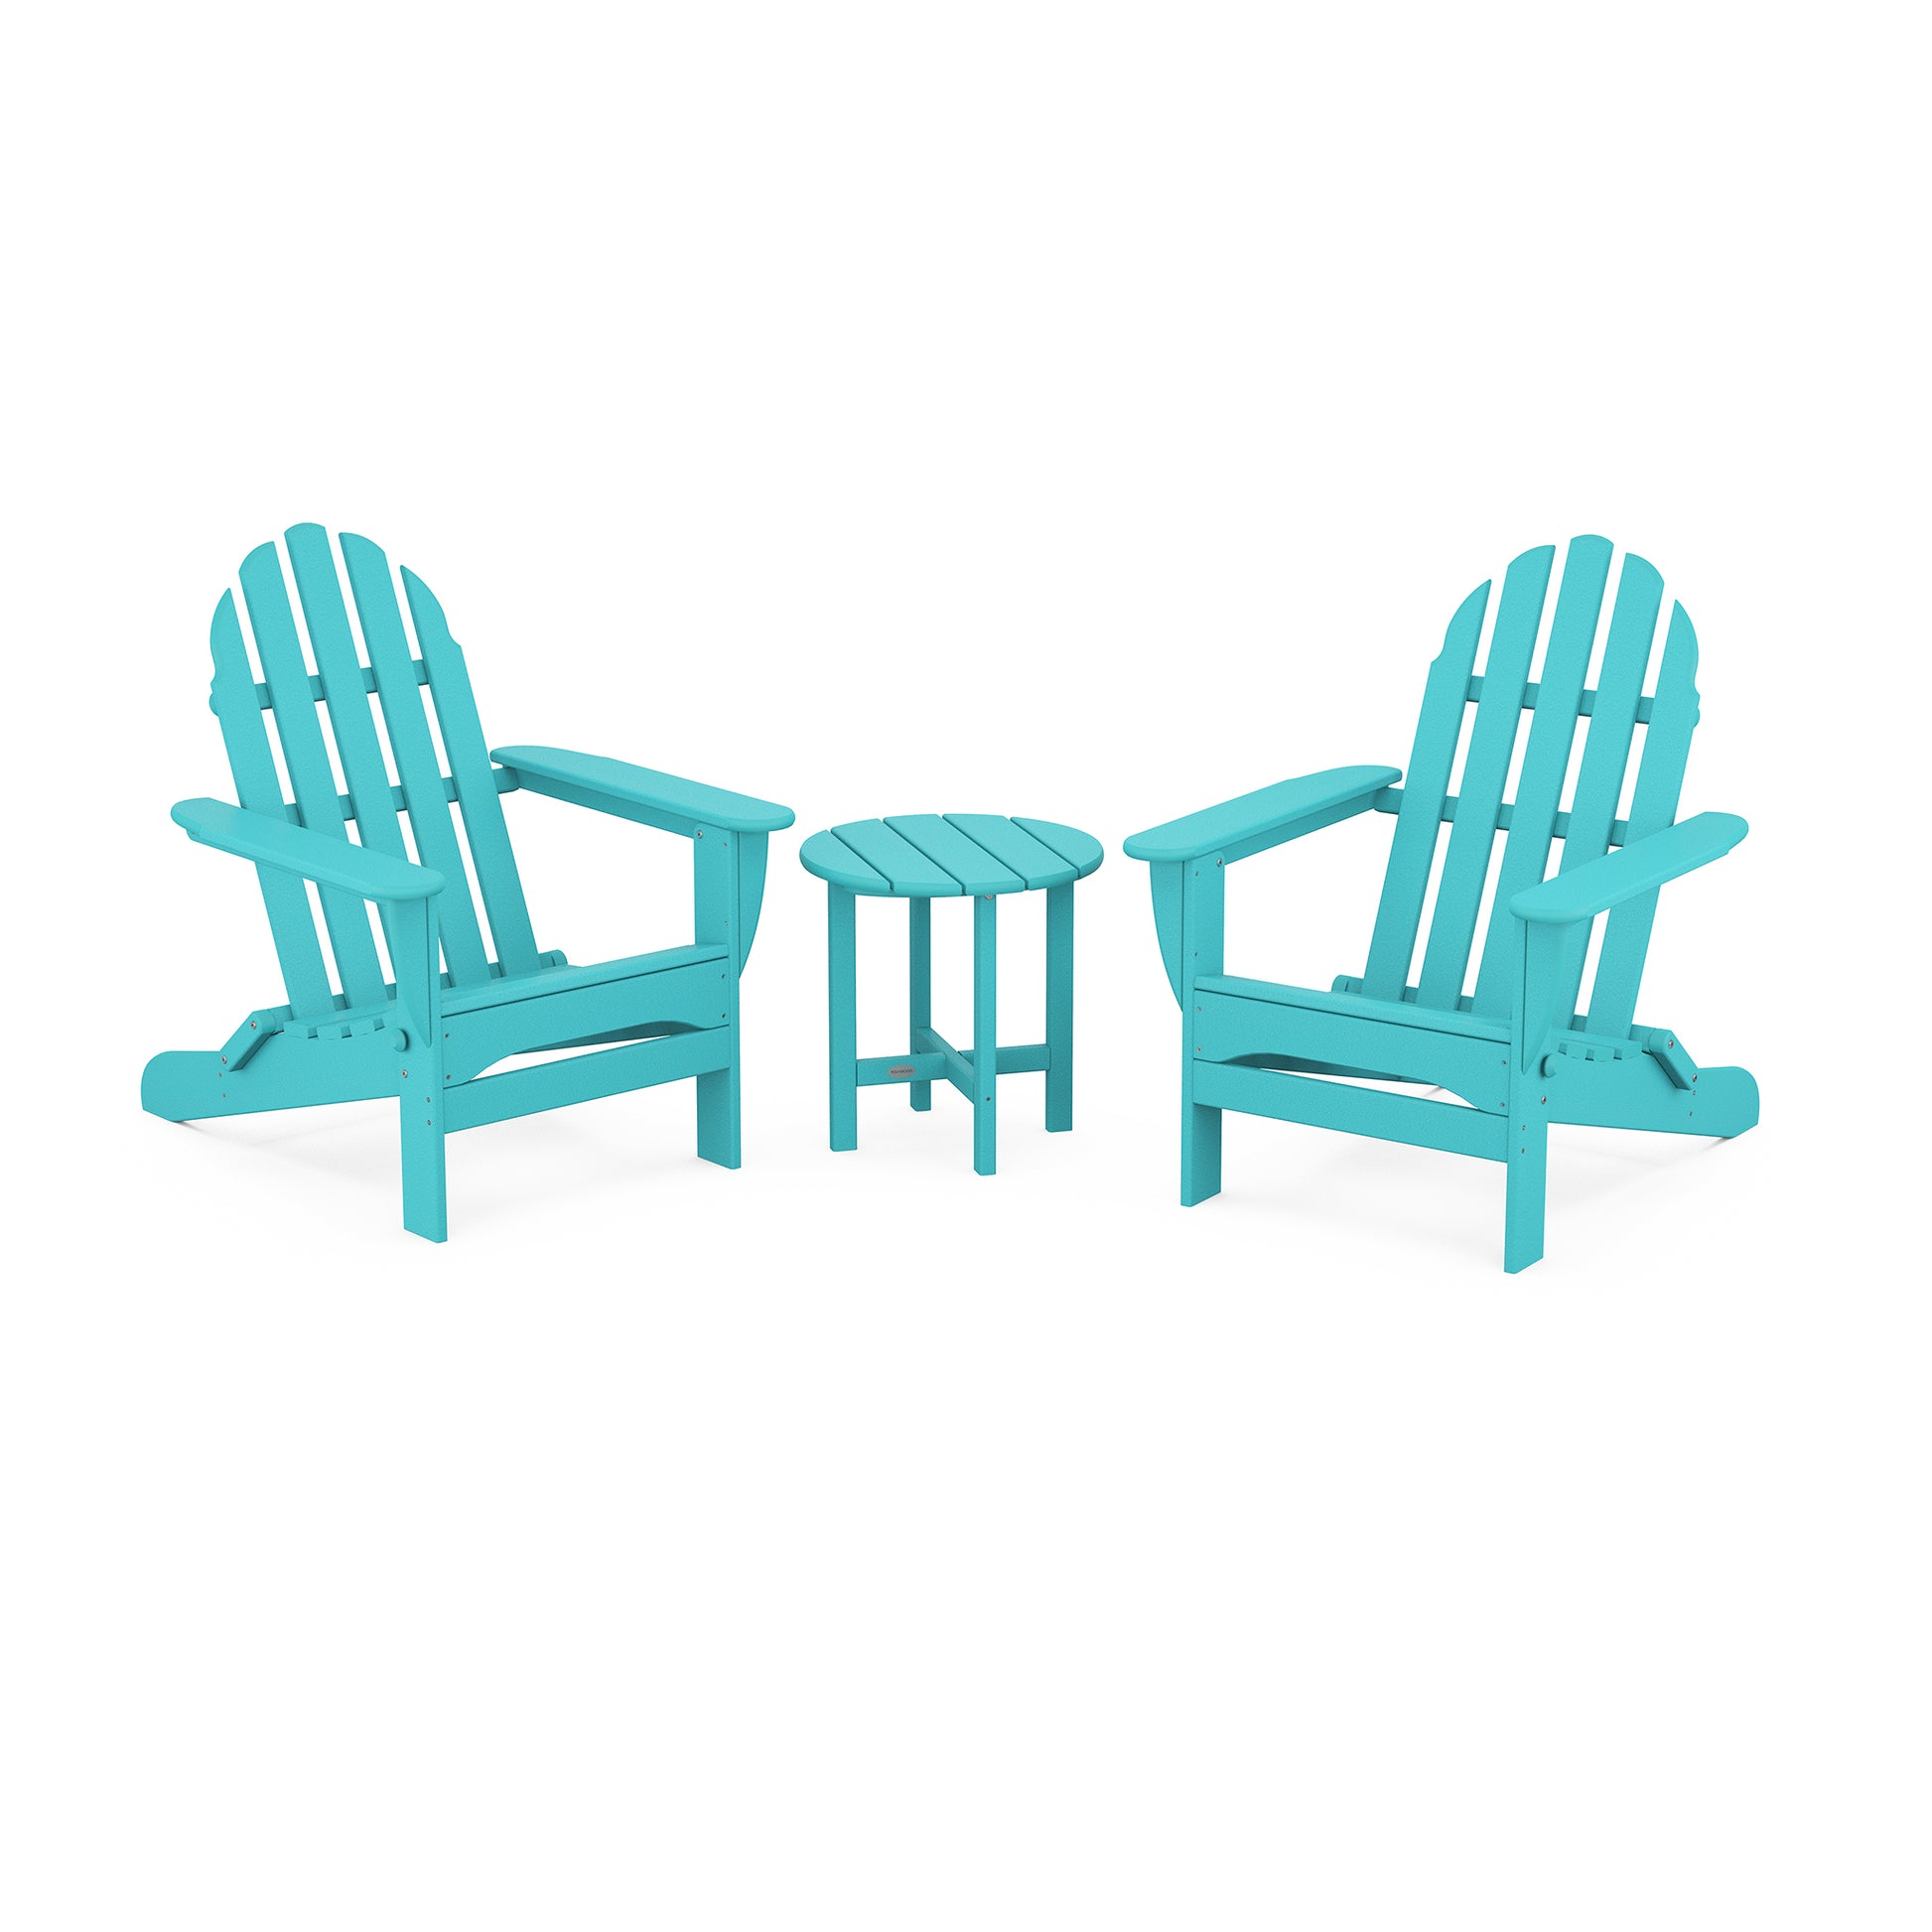 Two teal POLYWOOD Classic Folding Adirondack chairs from POLYWOOD® Outdoor Furniture face each other with a small round table between them, set against a plain white background.